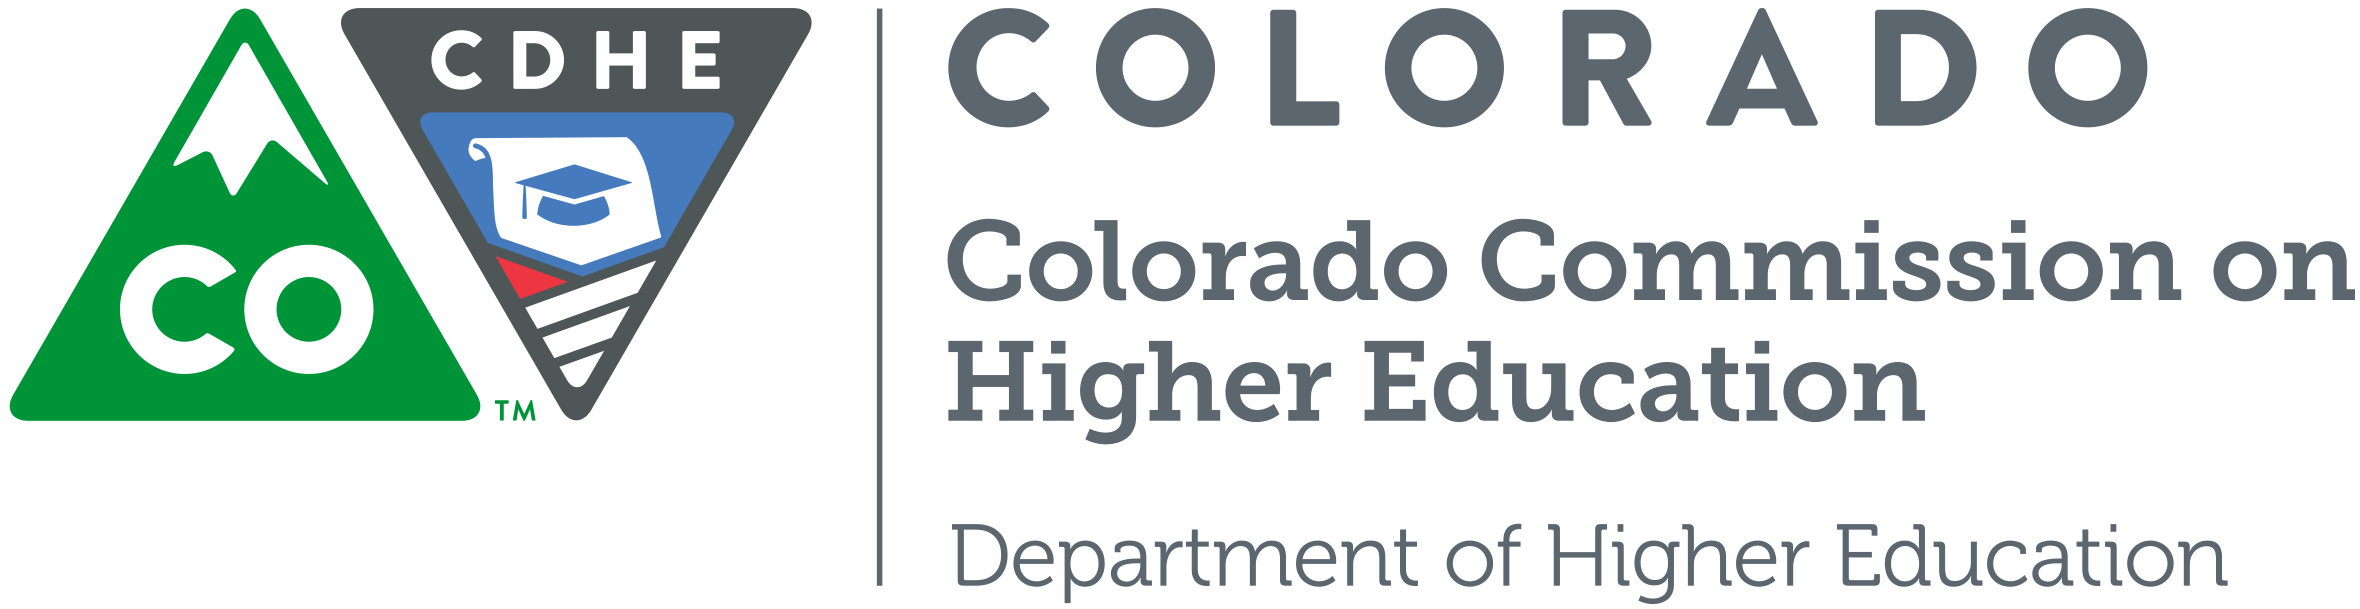 Colorado Commission on Higher Education Logo